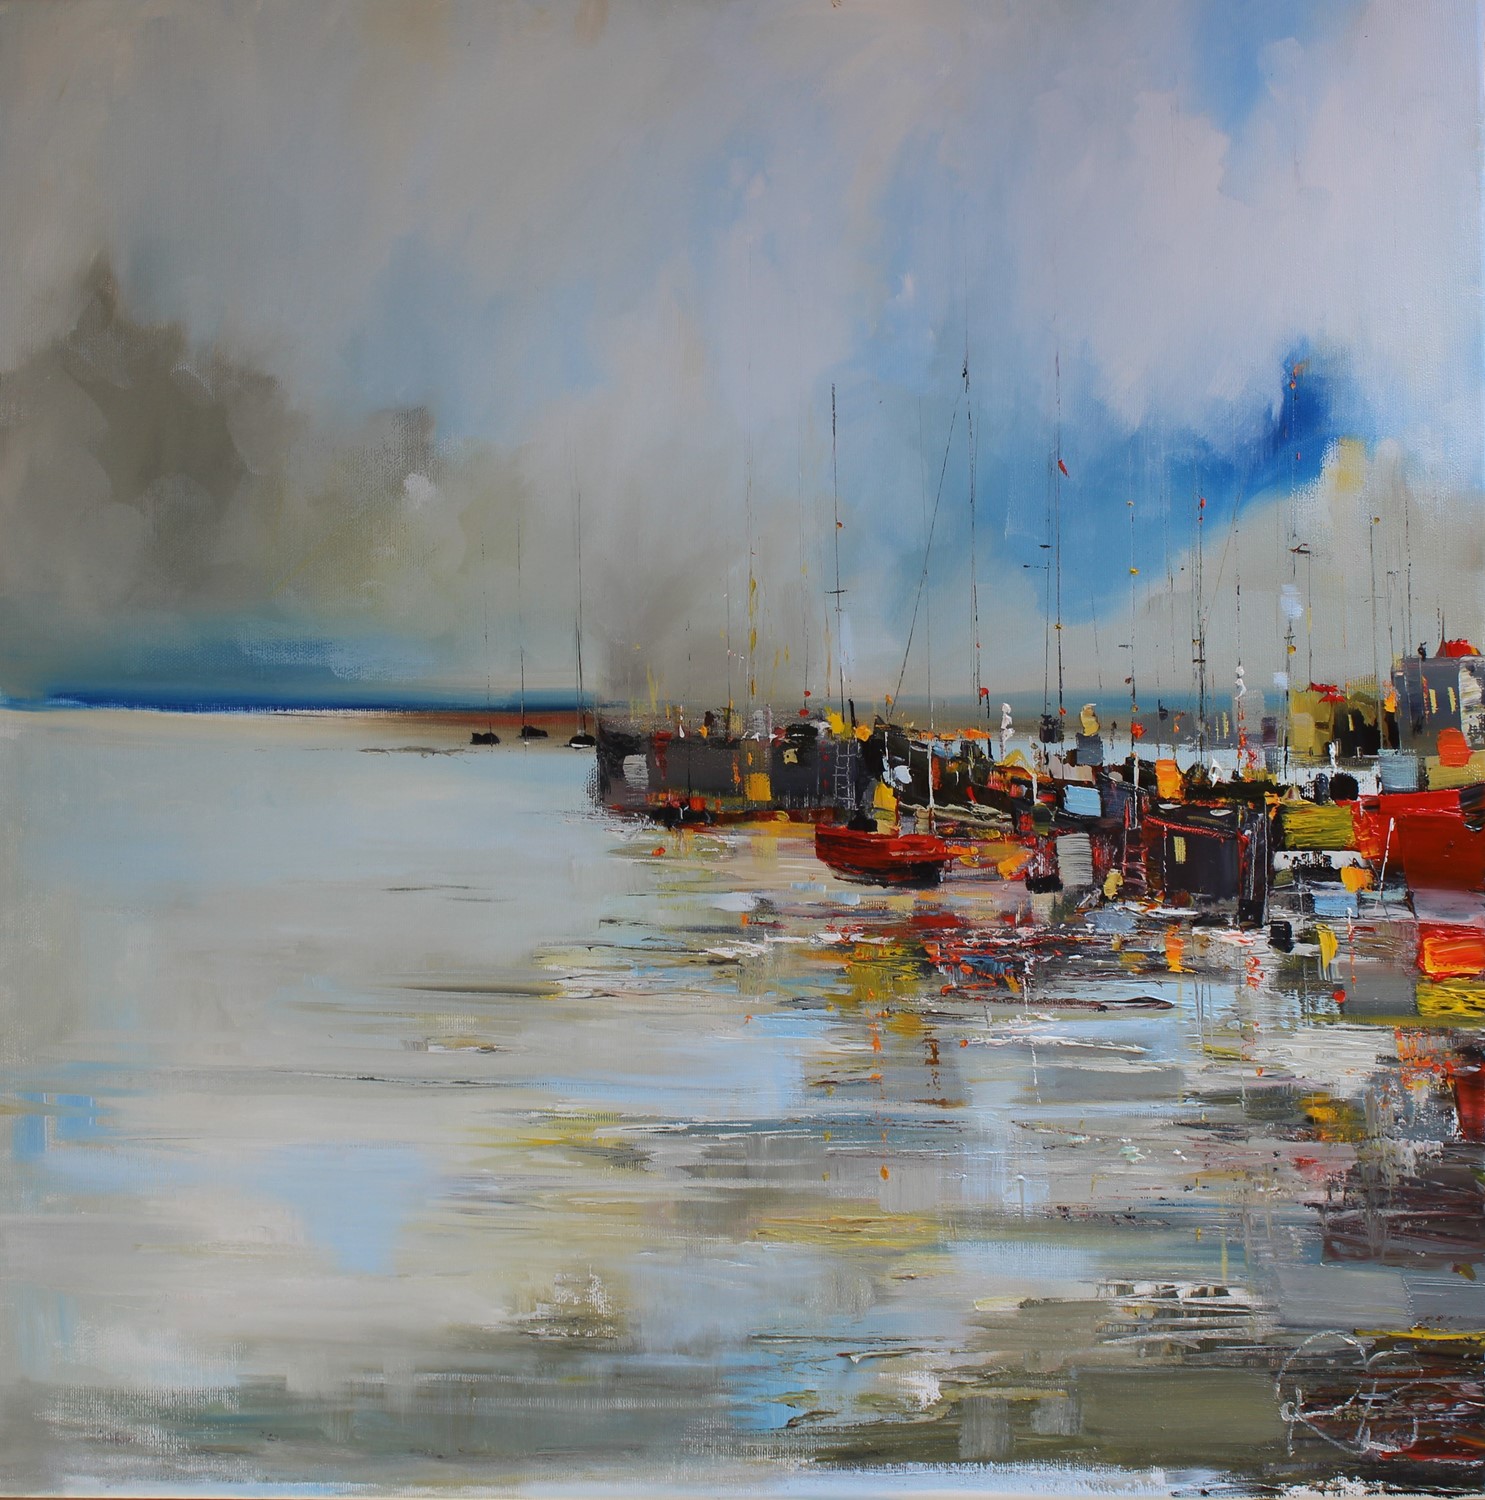 'A Clutter of Colour at the Harbour' by artist Rosanne Barr